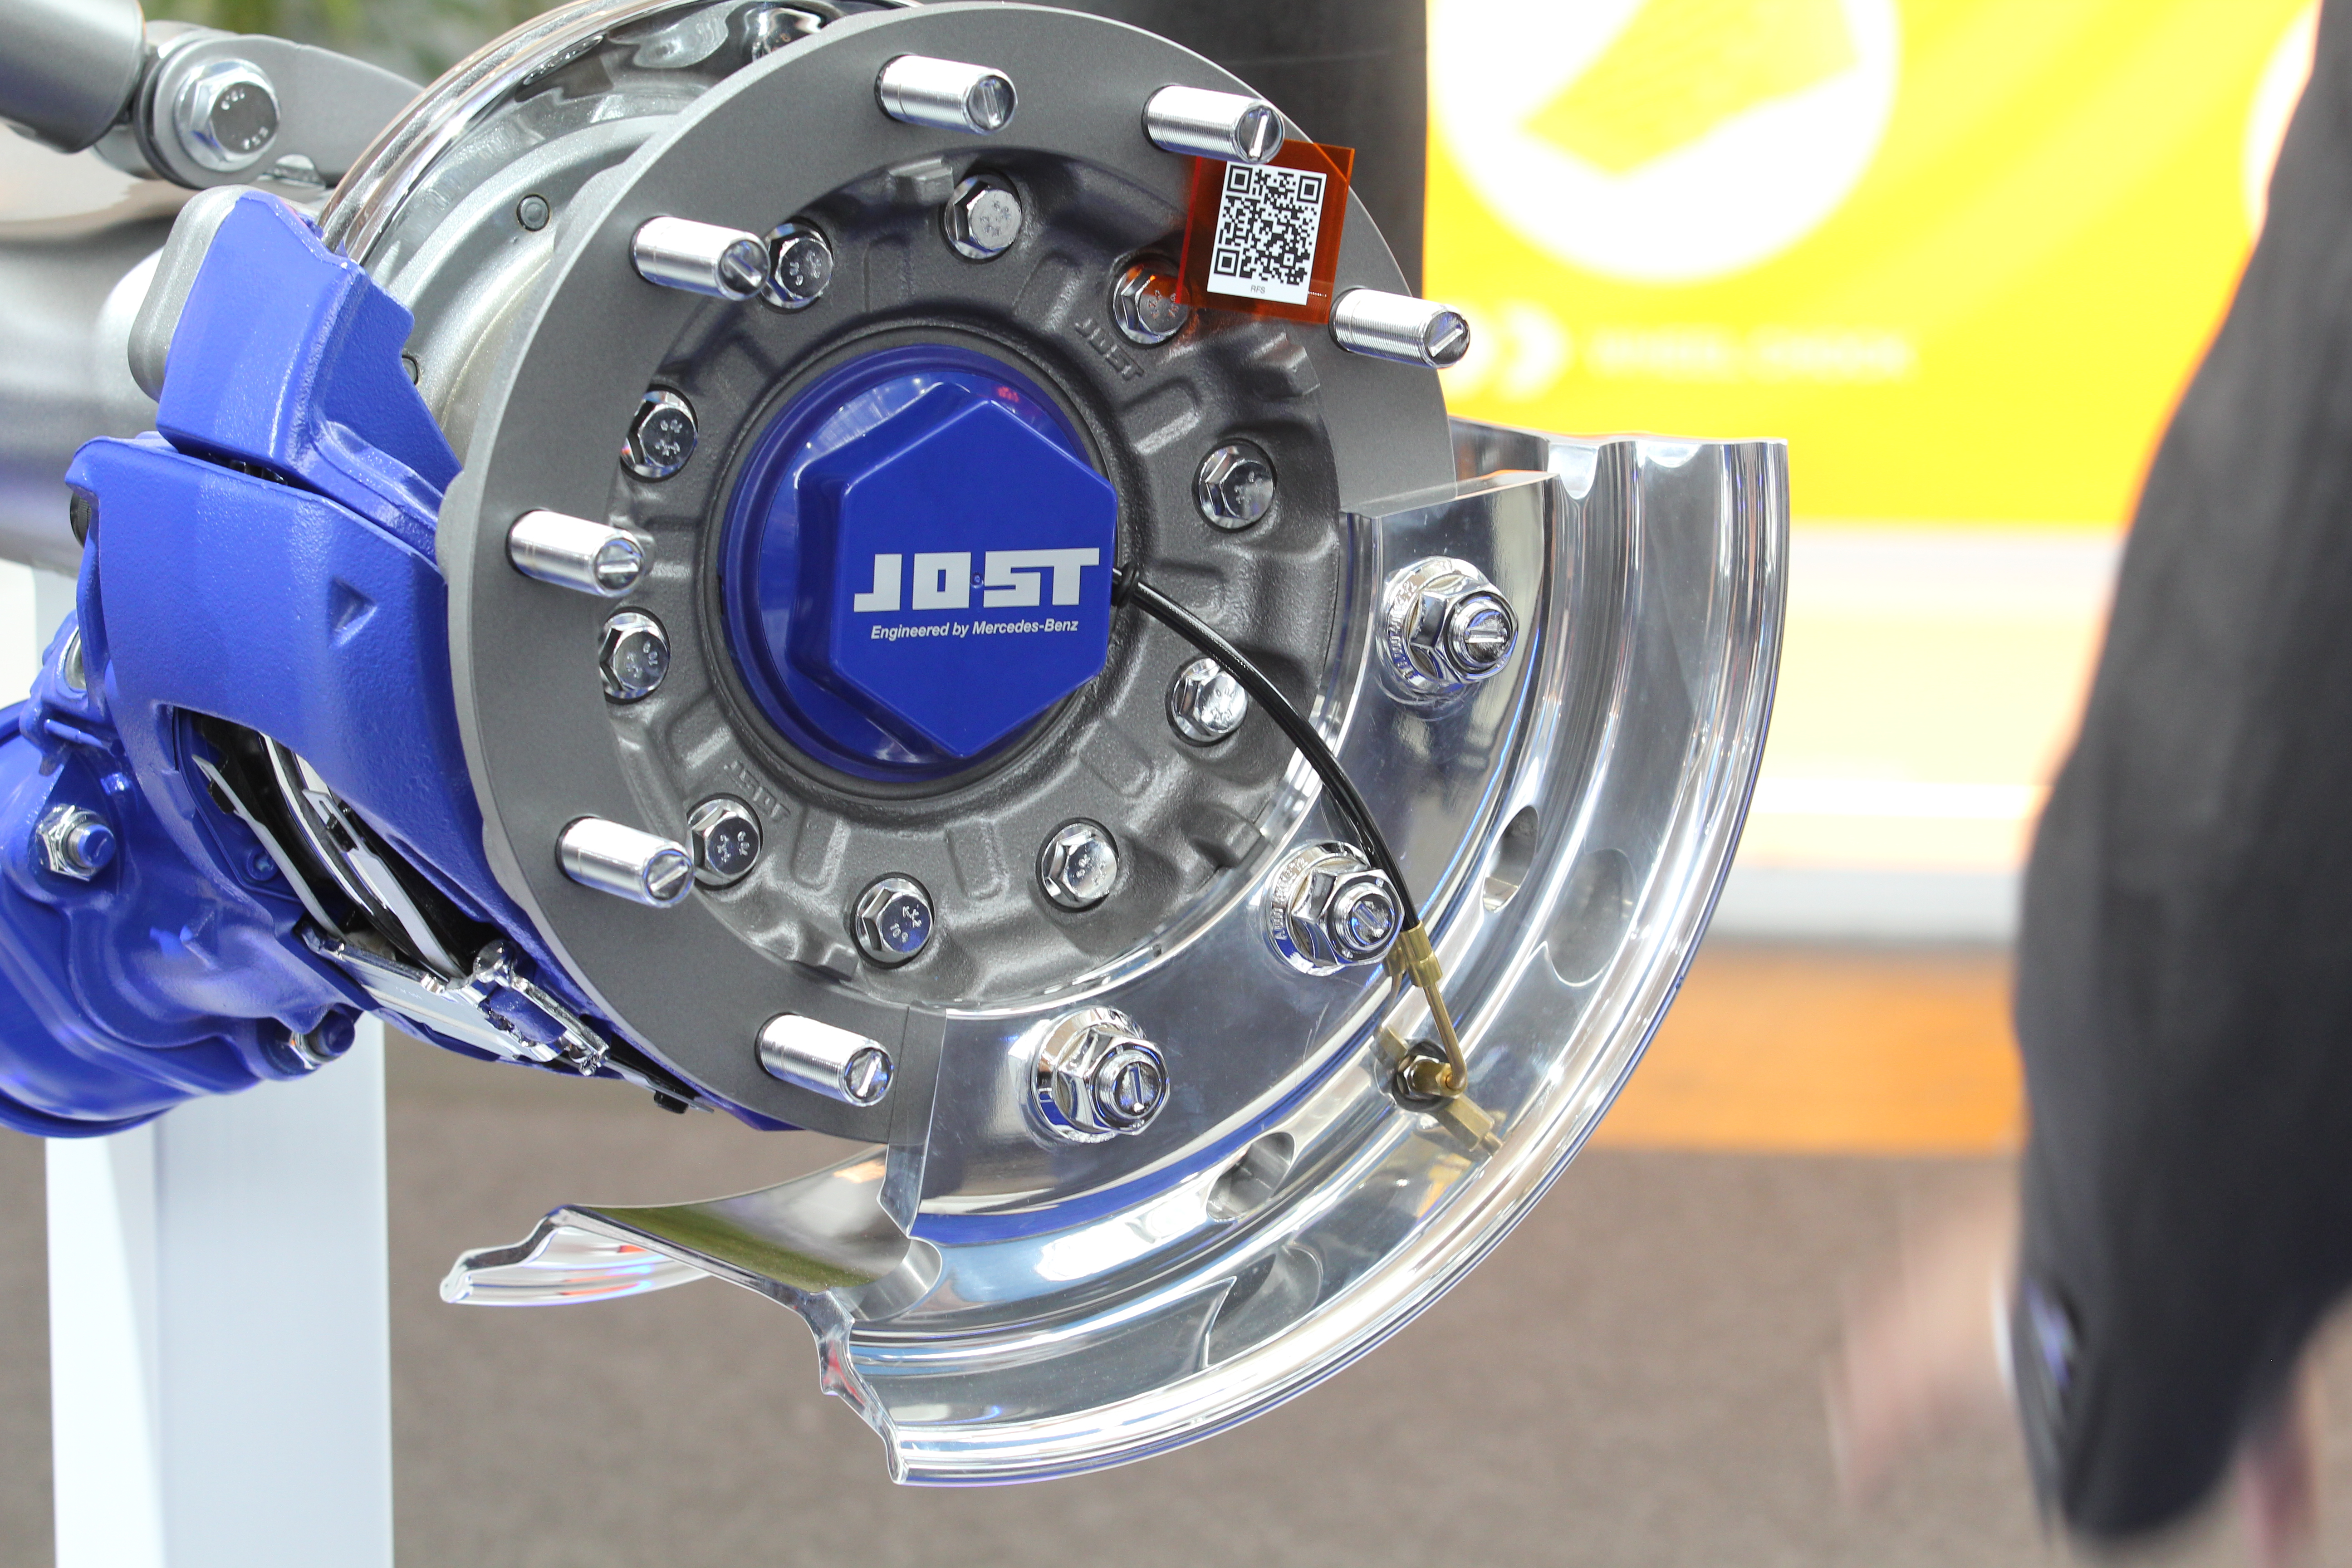 JOST choose PSI: Introducing The JOST ‘Plug & Play’ Automatic Tyre inflation system